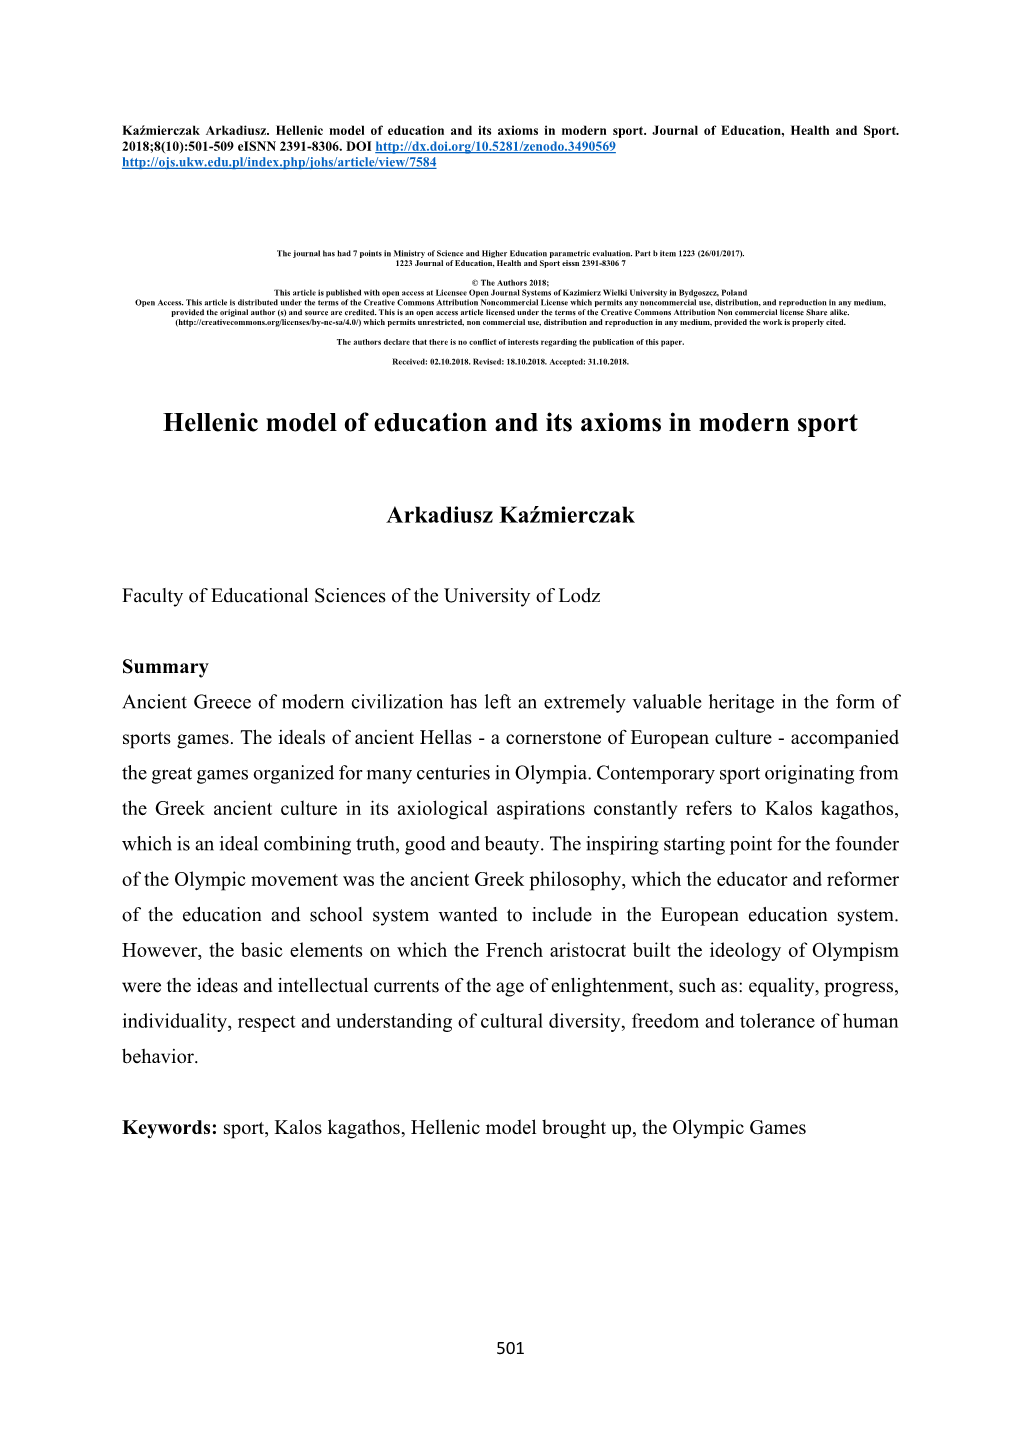 Hellenic Model of Education and Its Axioms in Modern Sport